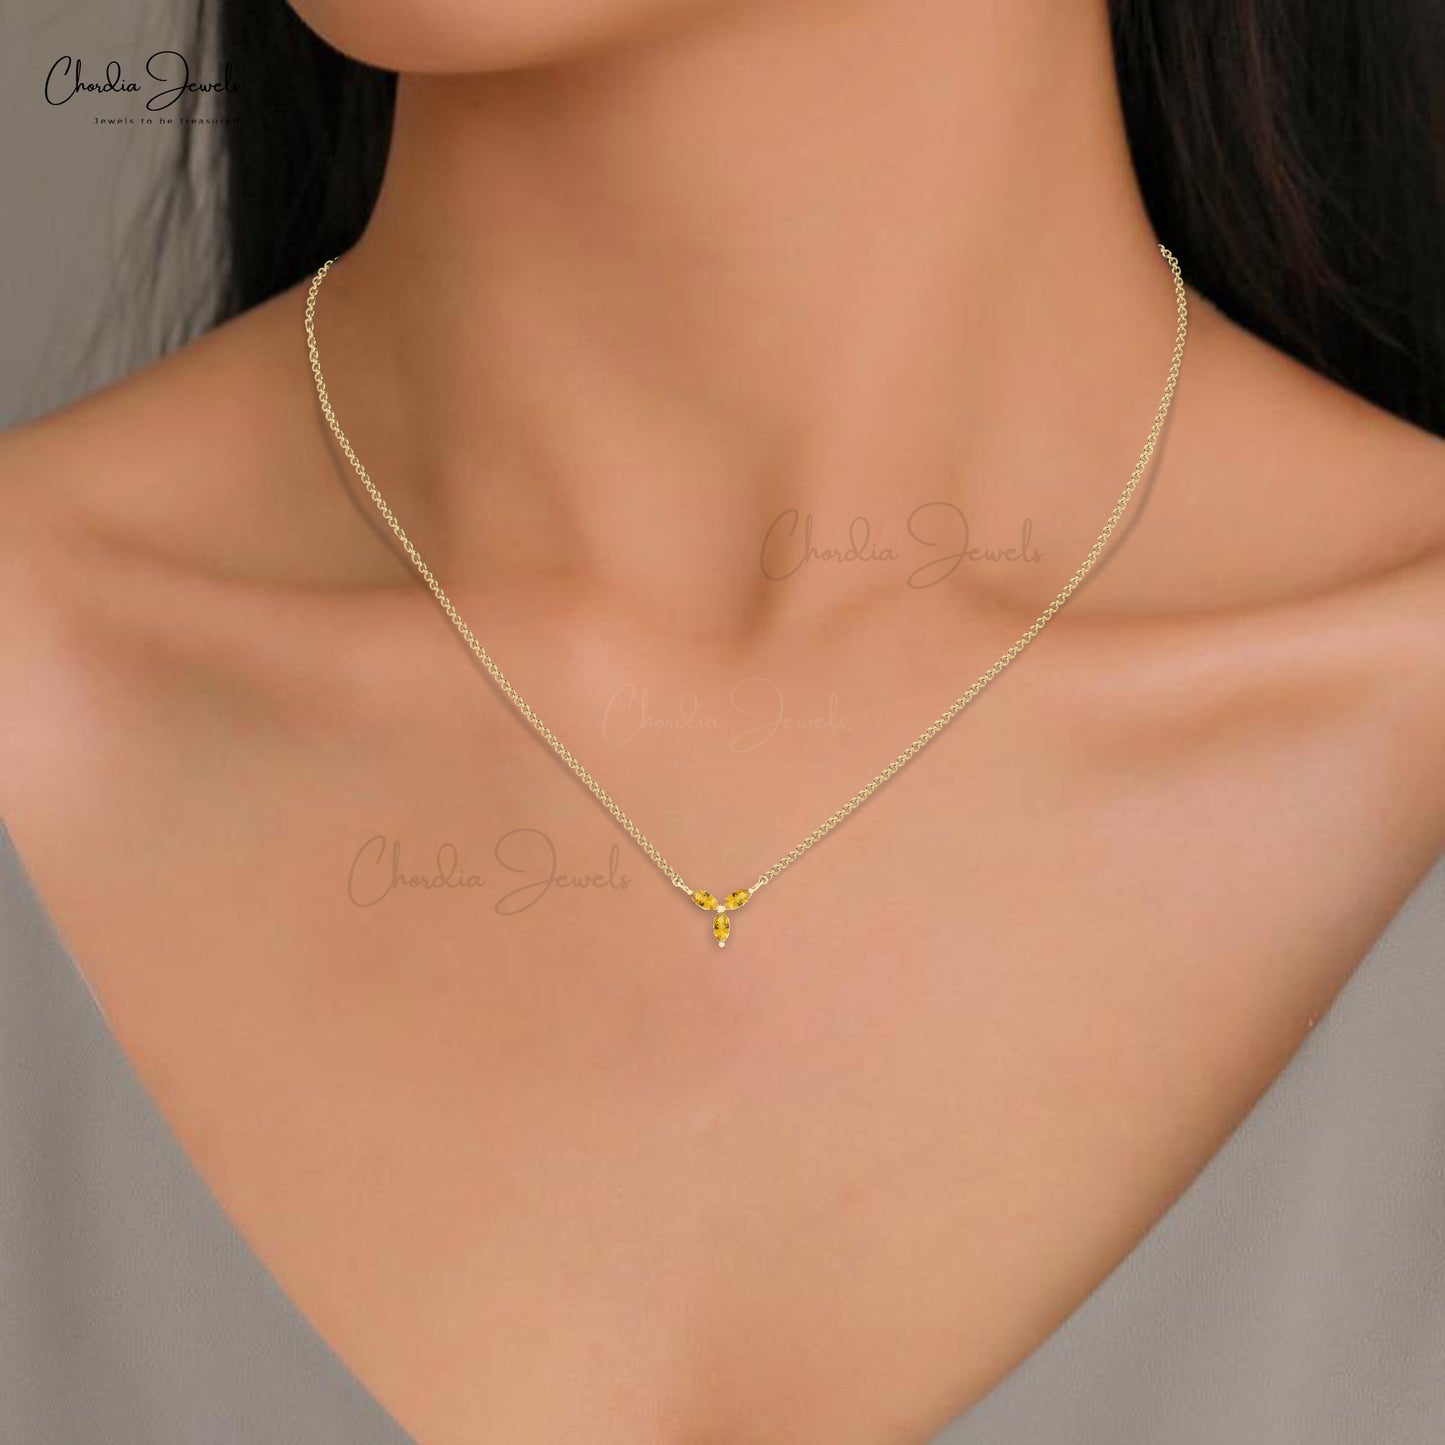 Beautiful Classic Unique Design Marquise Necklace Pendant in 14k Pure Gold Natural Yellow Citrine 3-Stone Necklace Hallmarked Jewelry For Gift